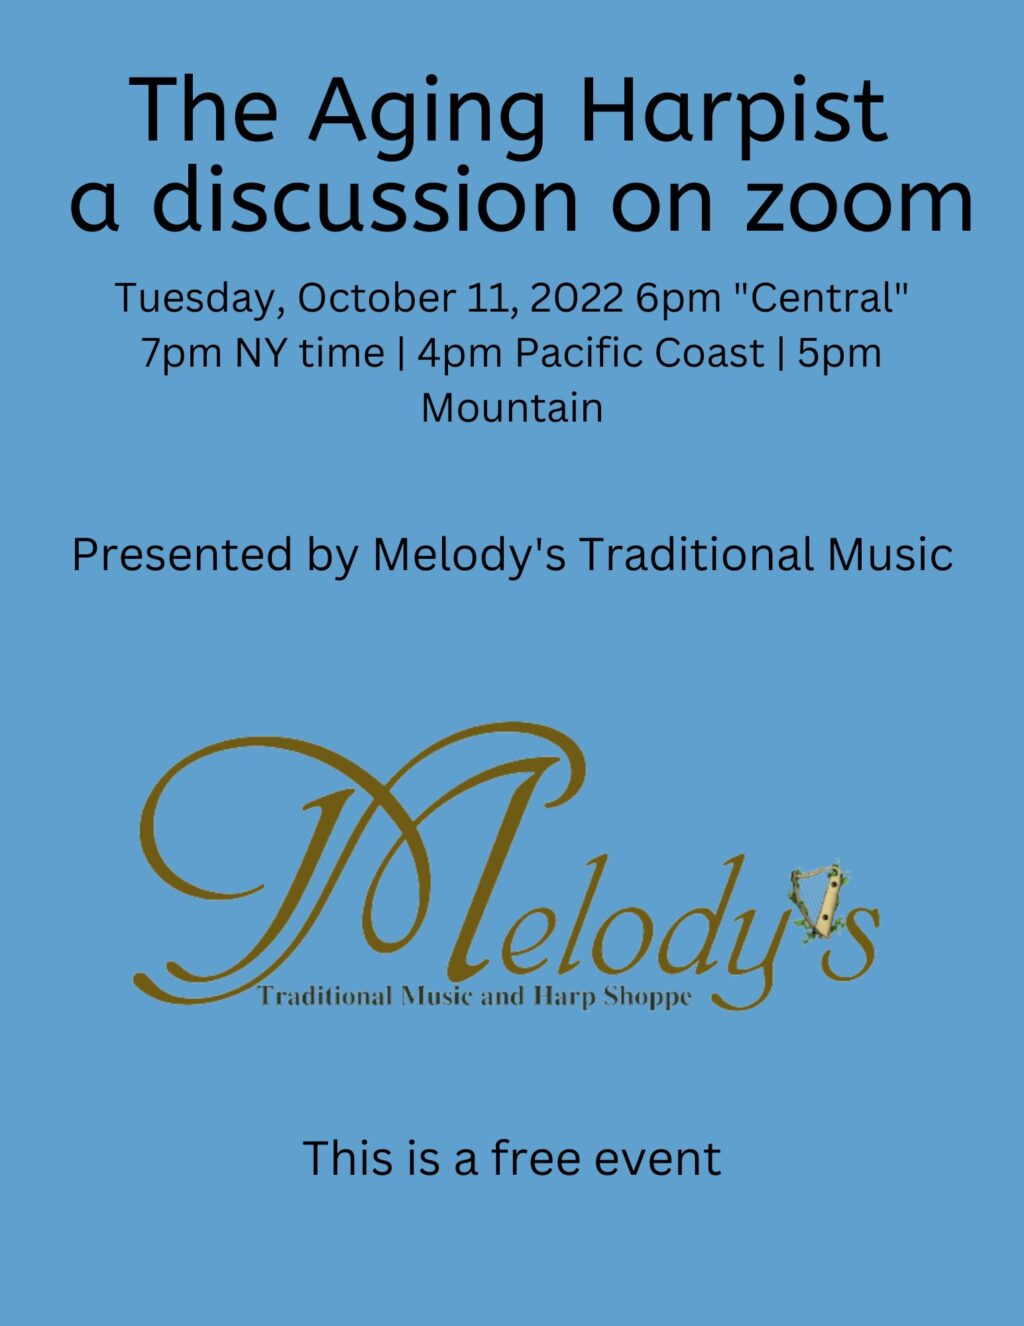 The Aging Harpist a discussion on Zoom Tuesday, October 11, 2022 6pm Central Presented by Melody's Traditional Music This is a free event